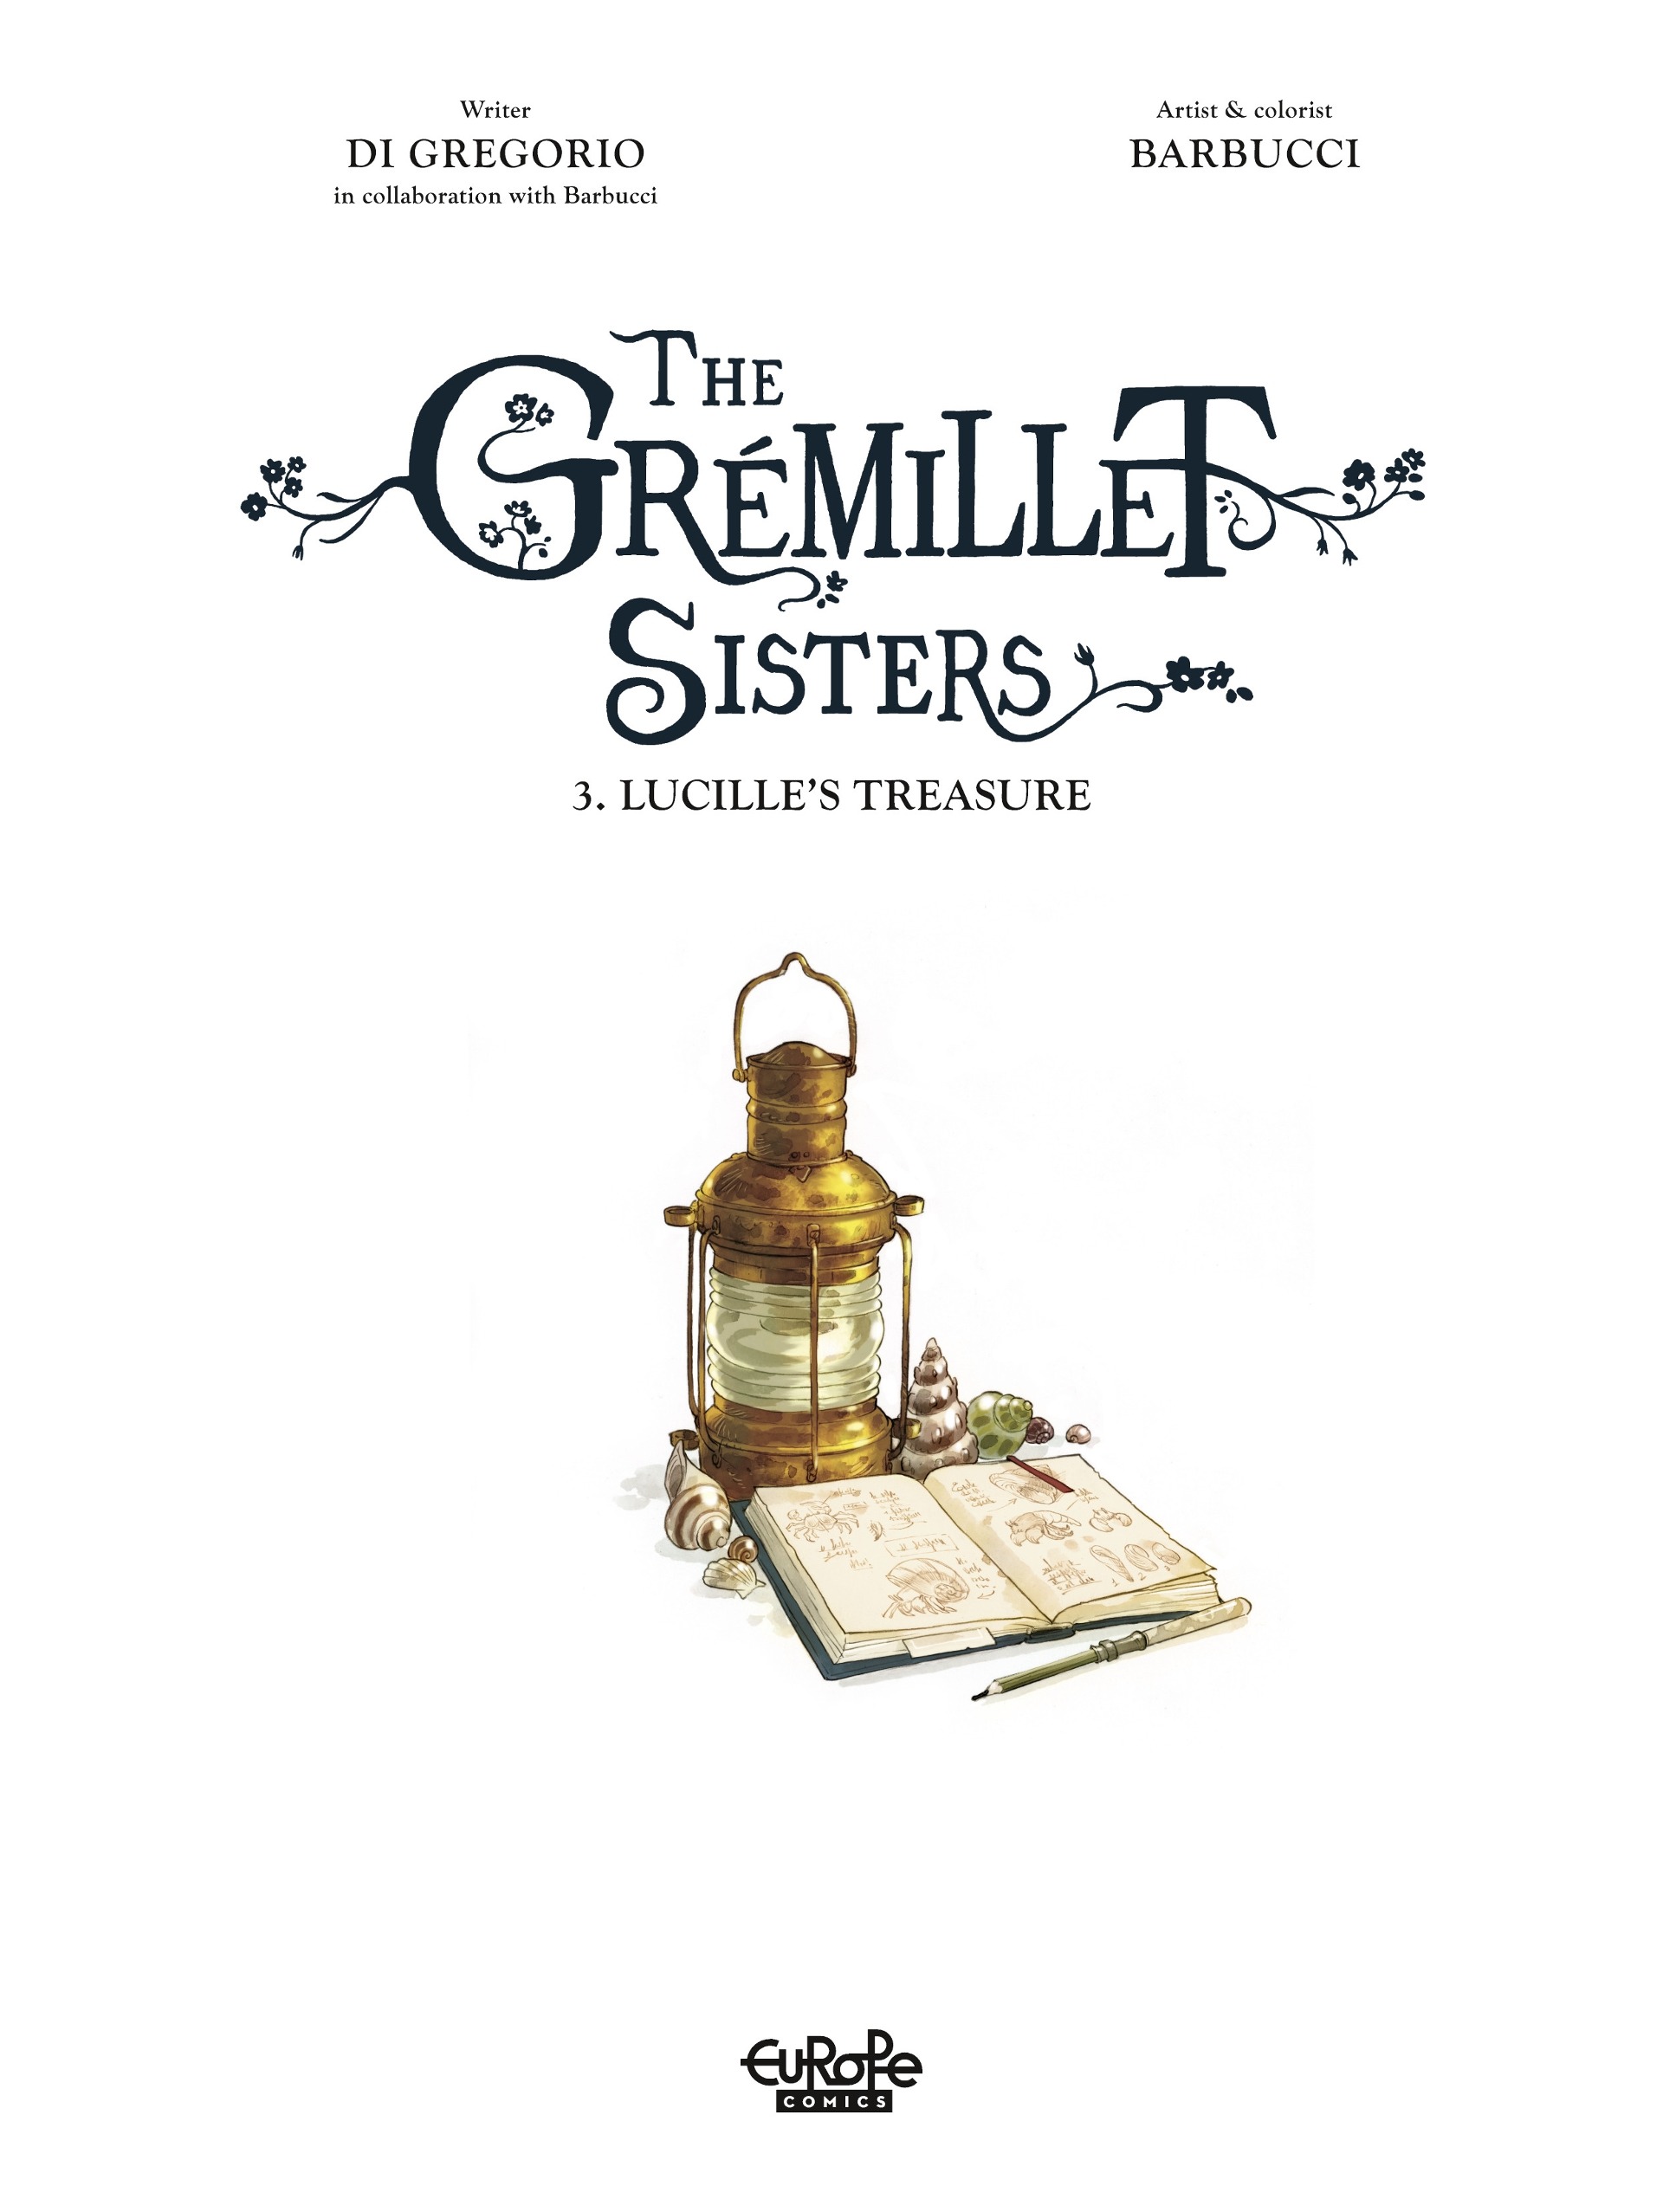 Read online The Grémillet Sisters comic -  Issue #3 - 3